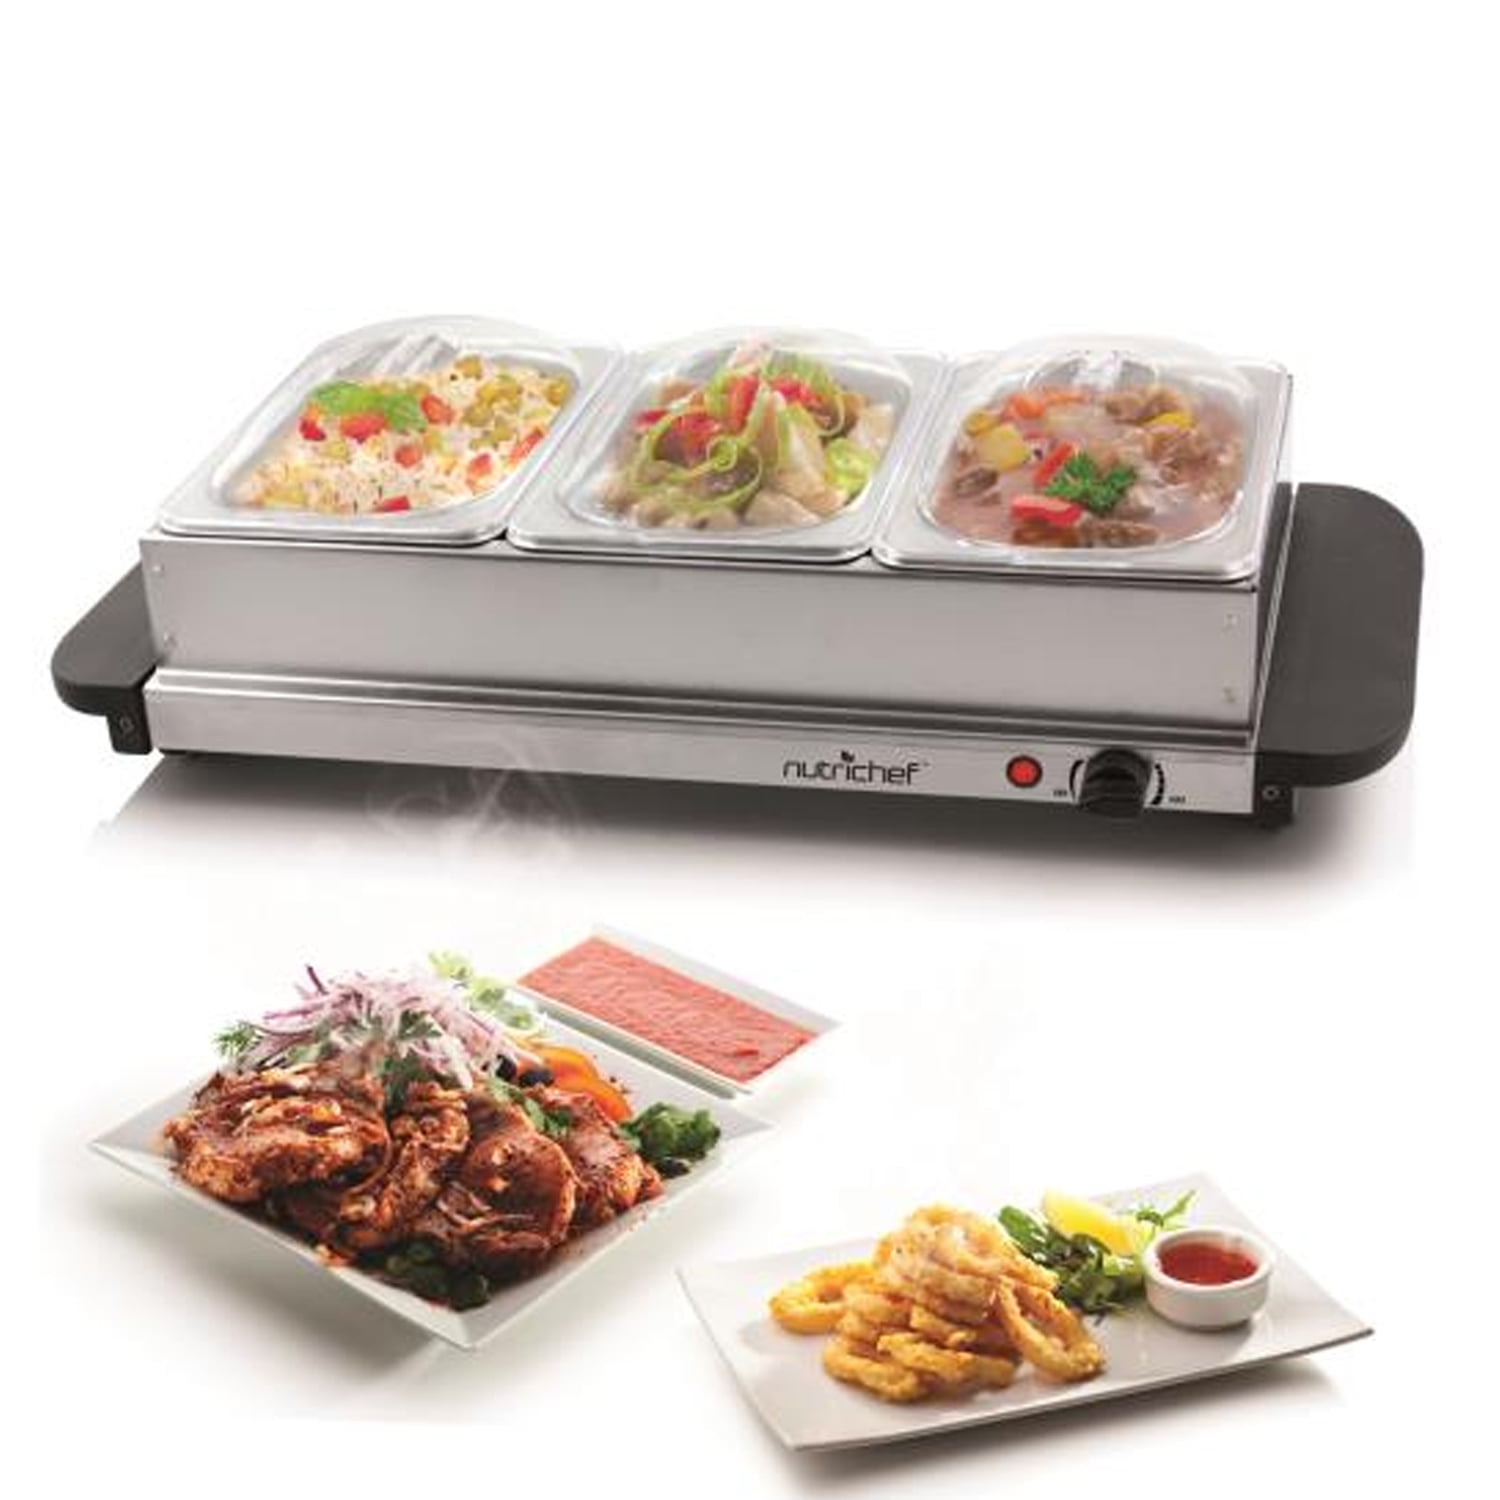 Top 5 Best Food Warmer Tray & Buffet Server in 2022 Reviews 